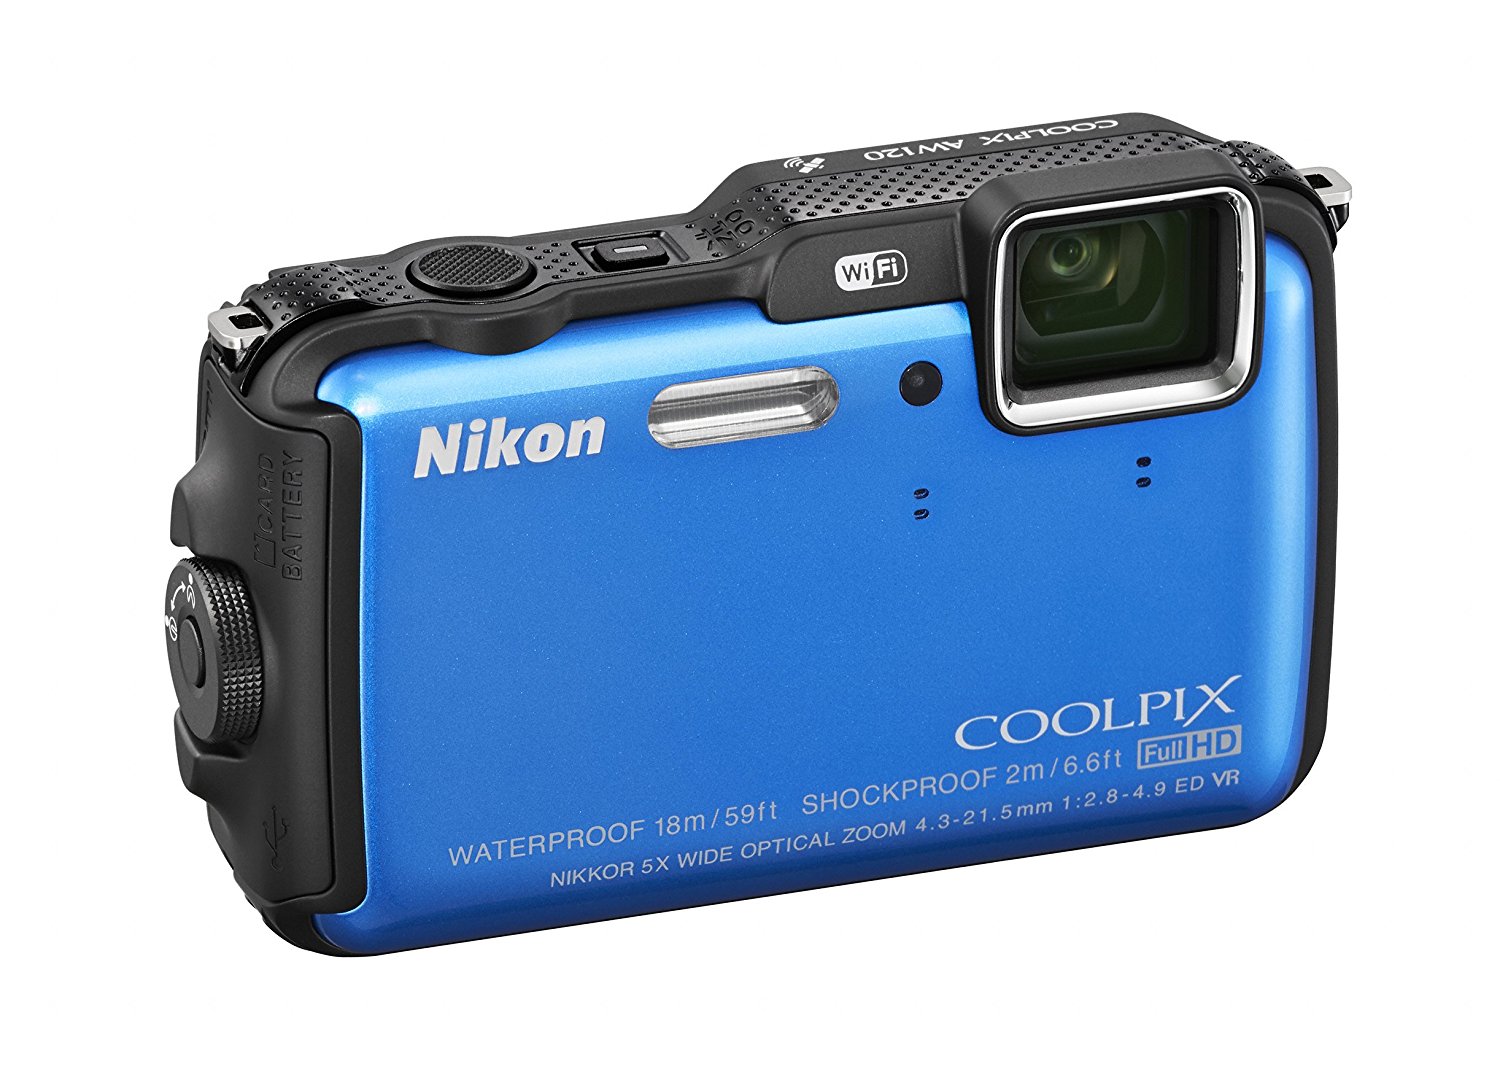 Nikon Coolpix Aw120 161 Mp Wi Fi And Waterproof Digital Camera With Gps And Full Hd 1080p Video 5914